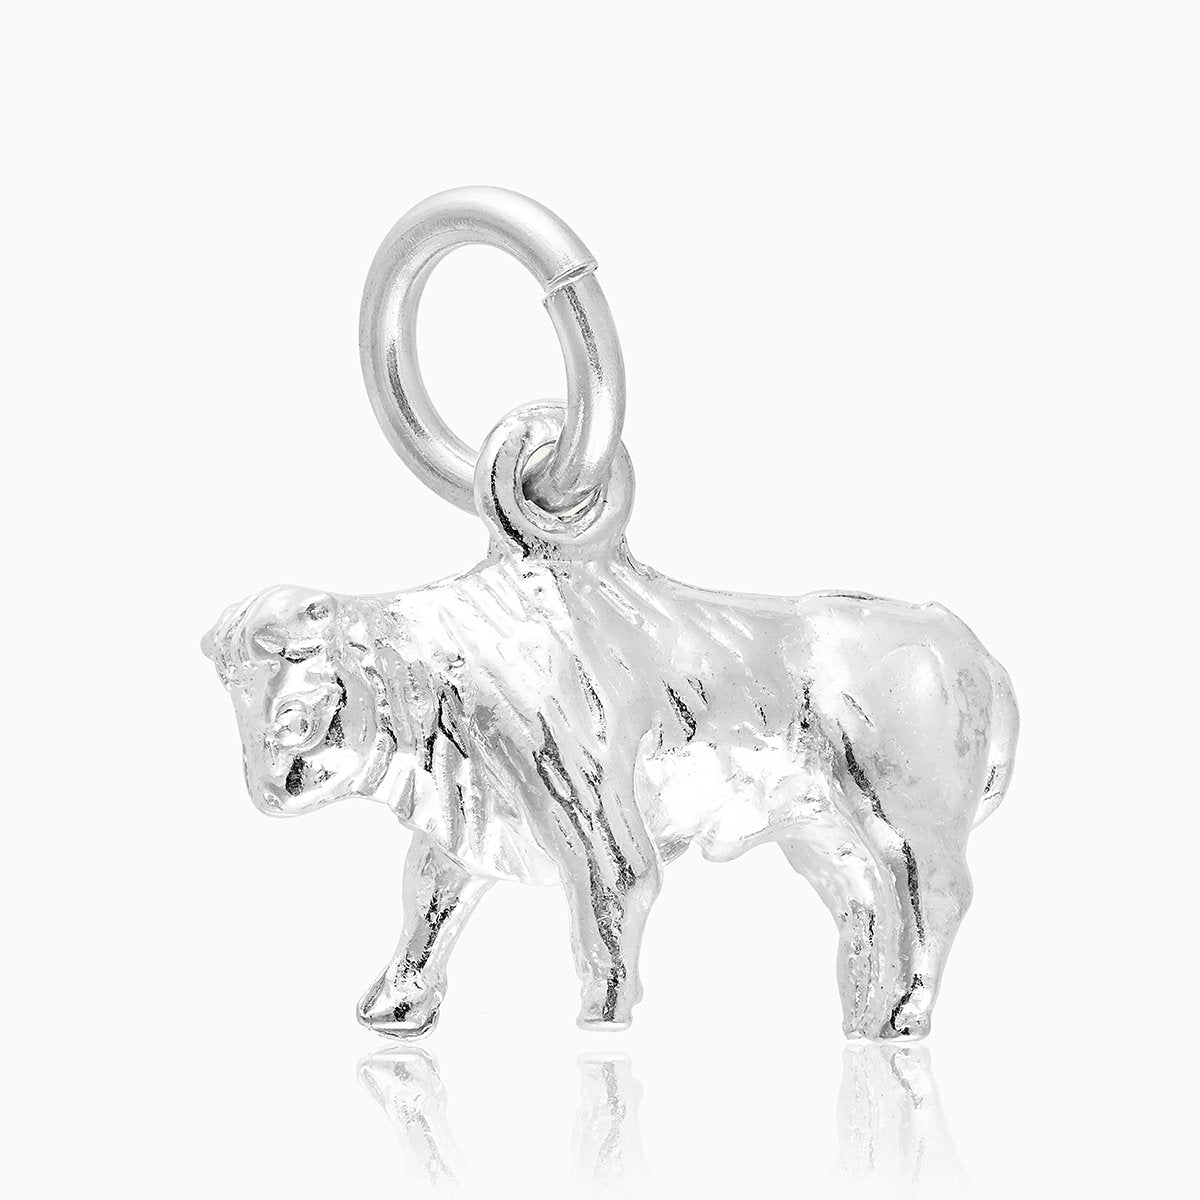 Product title: Taurus Silver Charm, product type: Charm